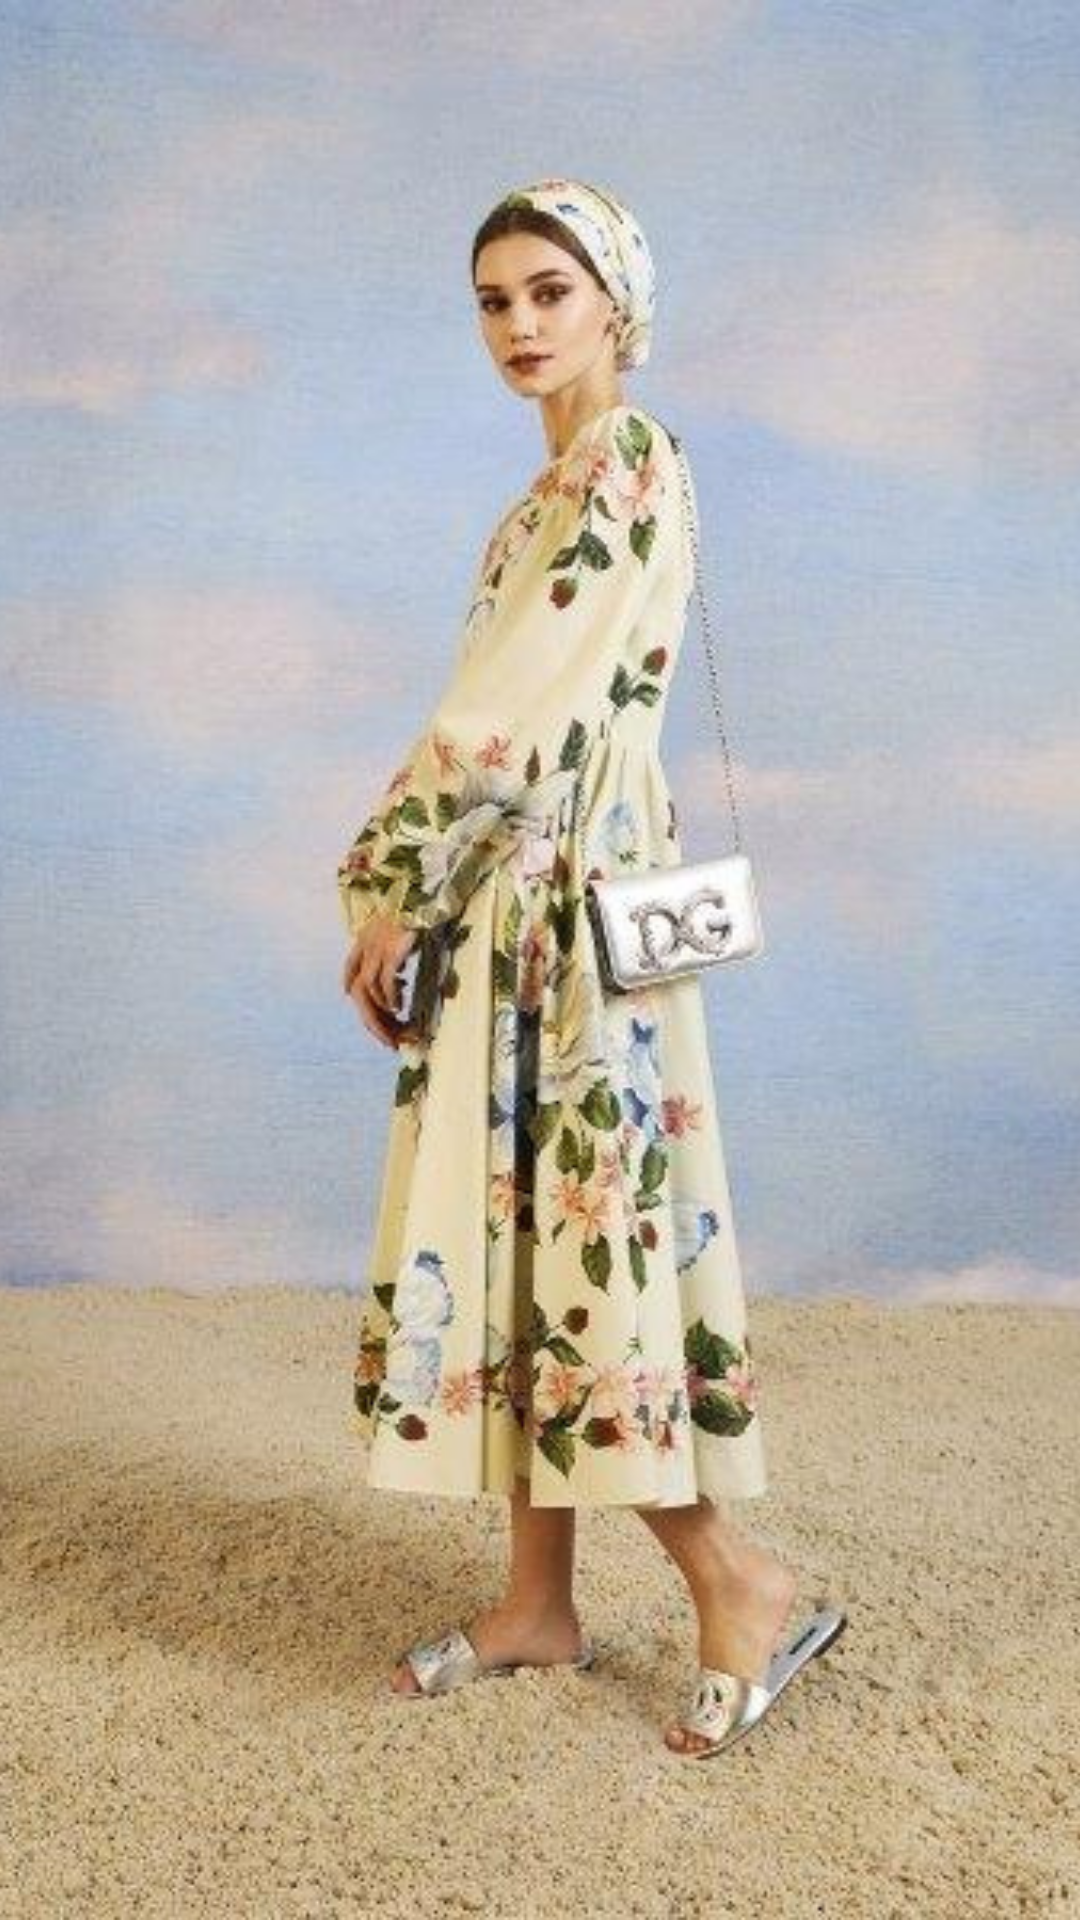 Ramadan 2021 capsule collections to shop now